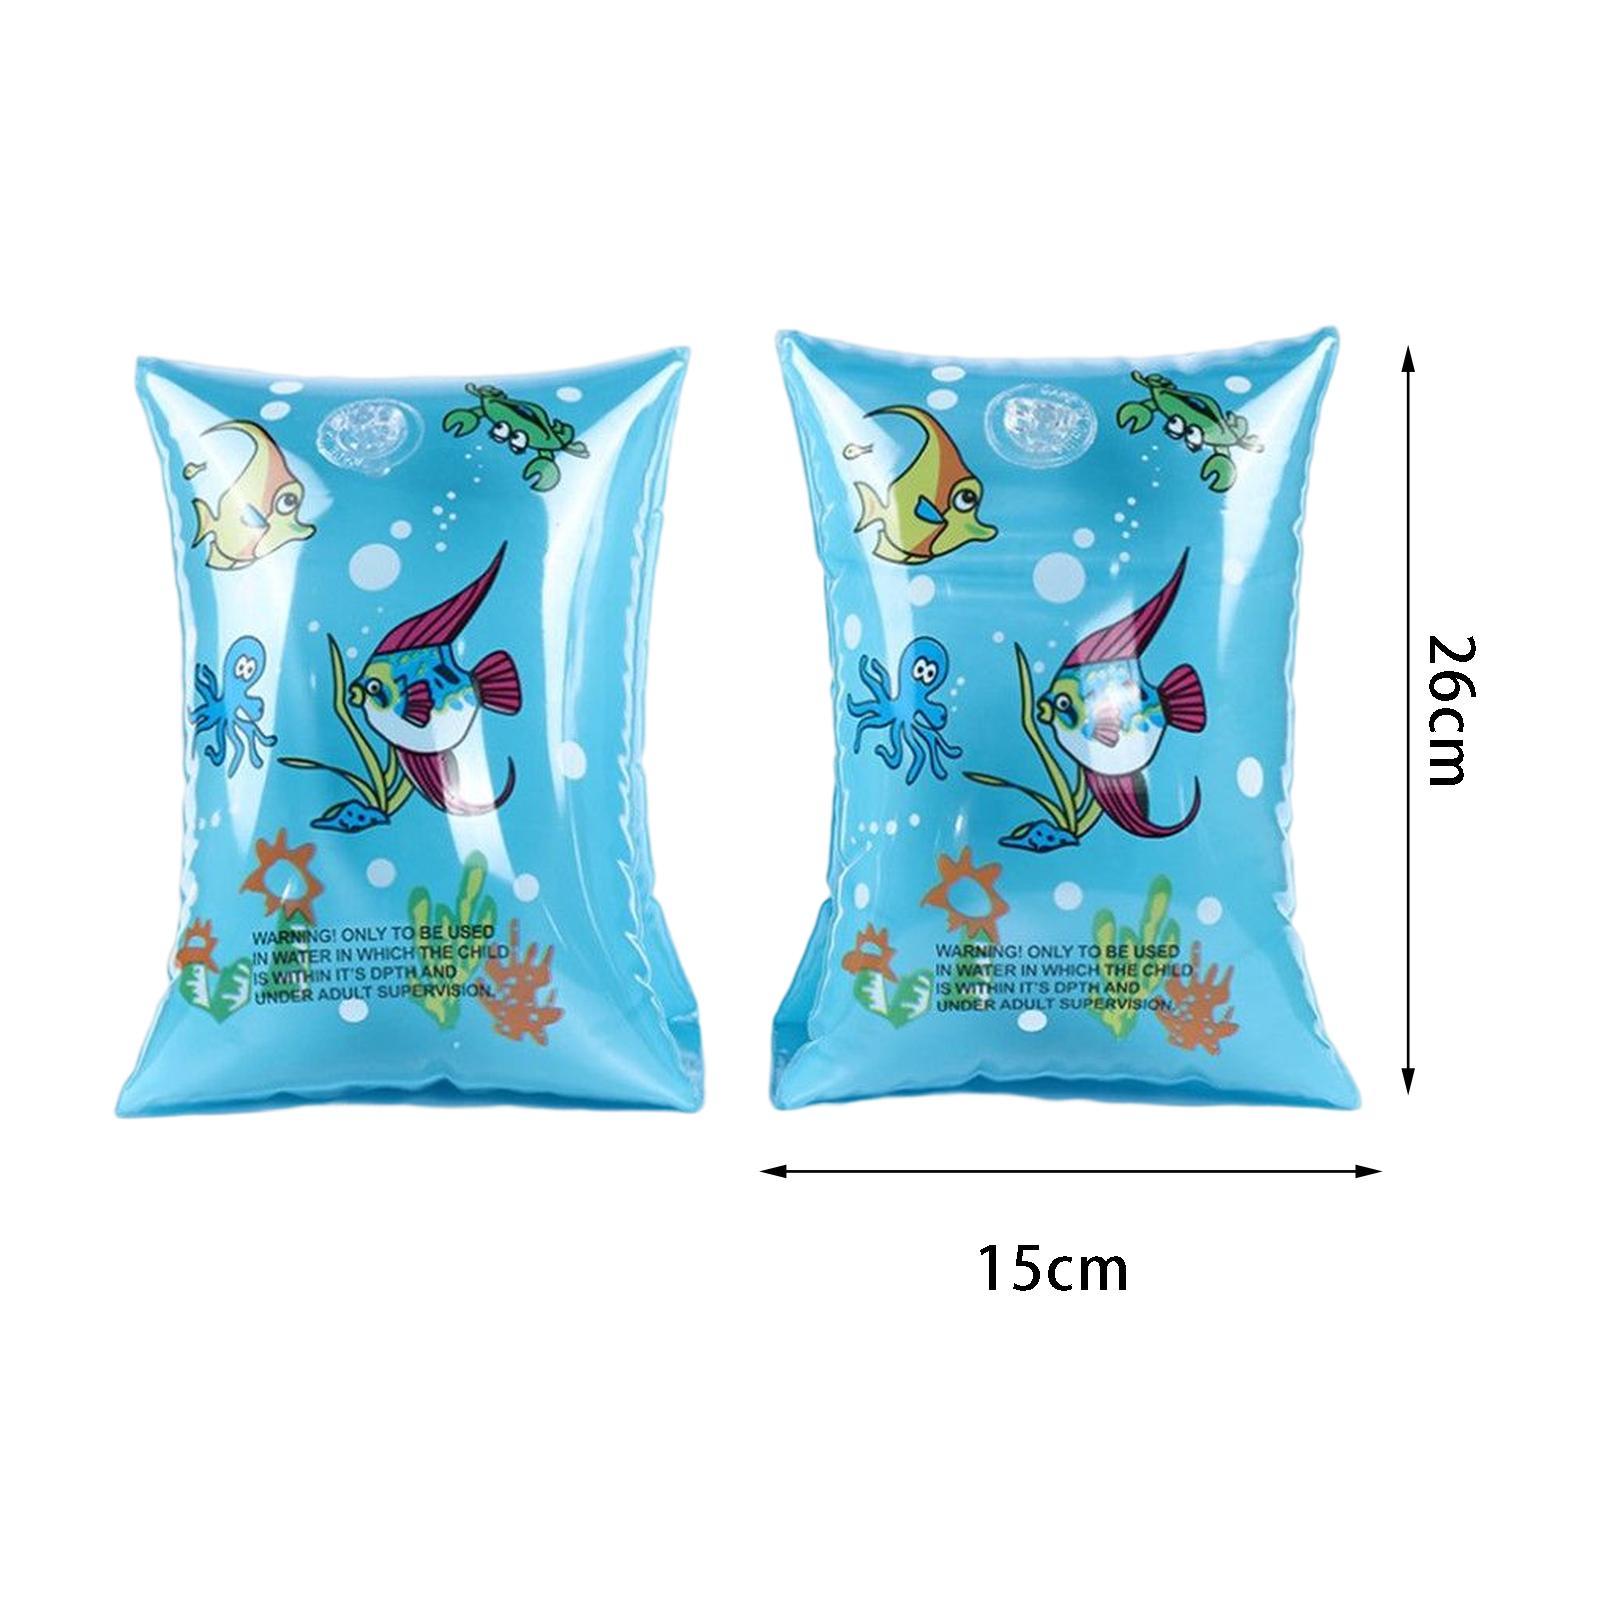 2x Inflatable Armbands for Kids Swim Sleeves Float Floats Child Dinosaur